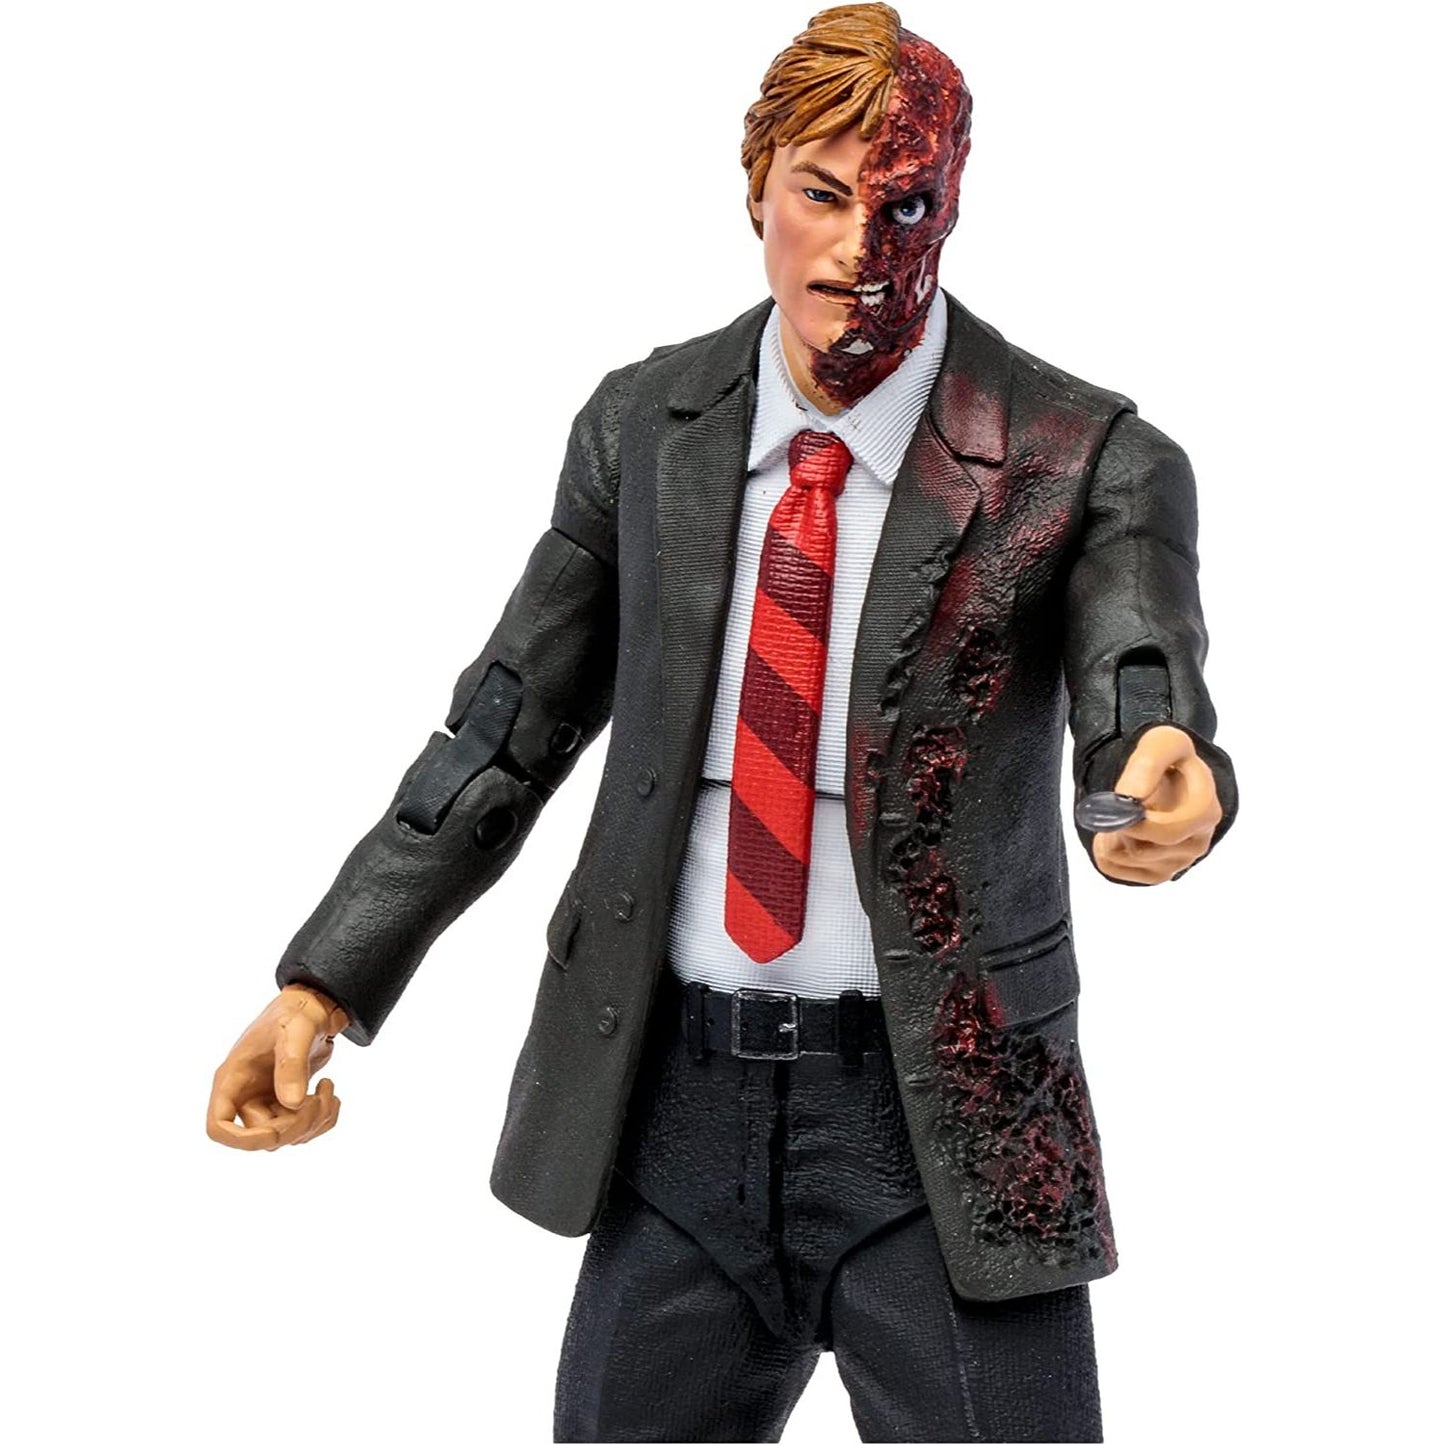 DC Multiverse Two-Face Action Figure (The Dark Knight Trilogy) 7-Inch Build-A-Figure Toy